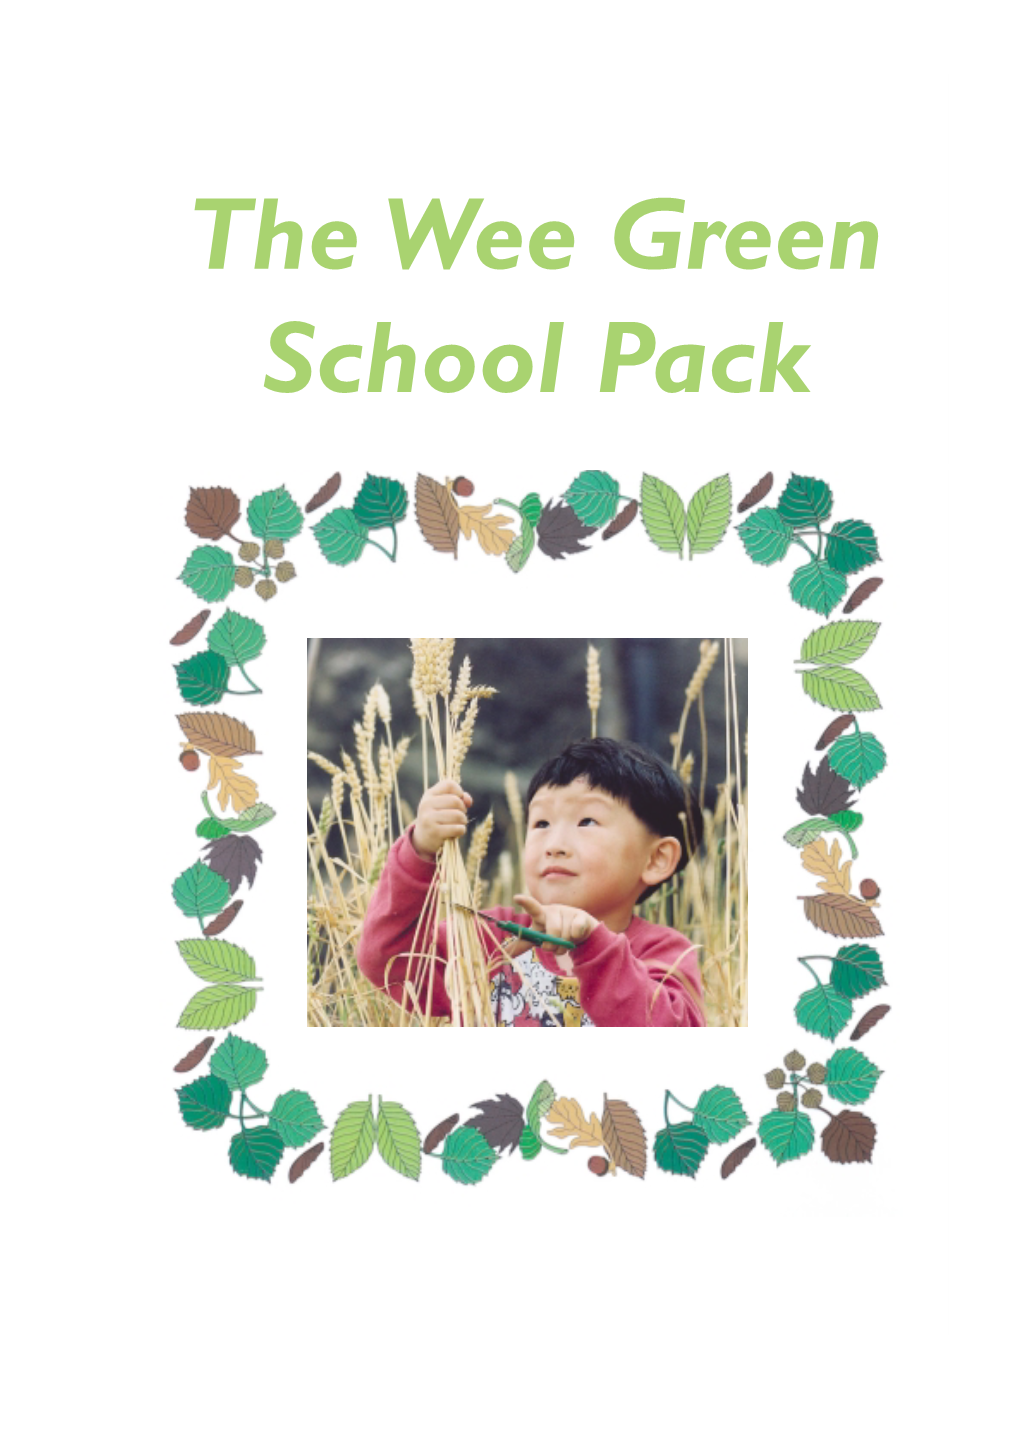 Wee Green School Pack Introduction to Creating Wildlife Projects Within School Grounds for Nursery & Primary Age Children